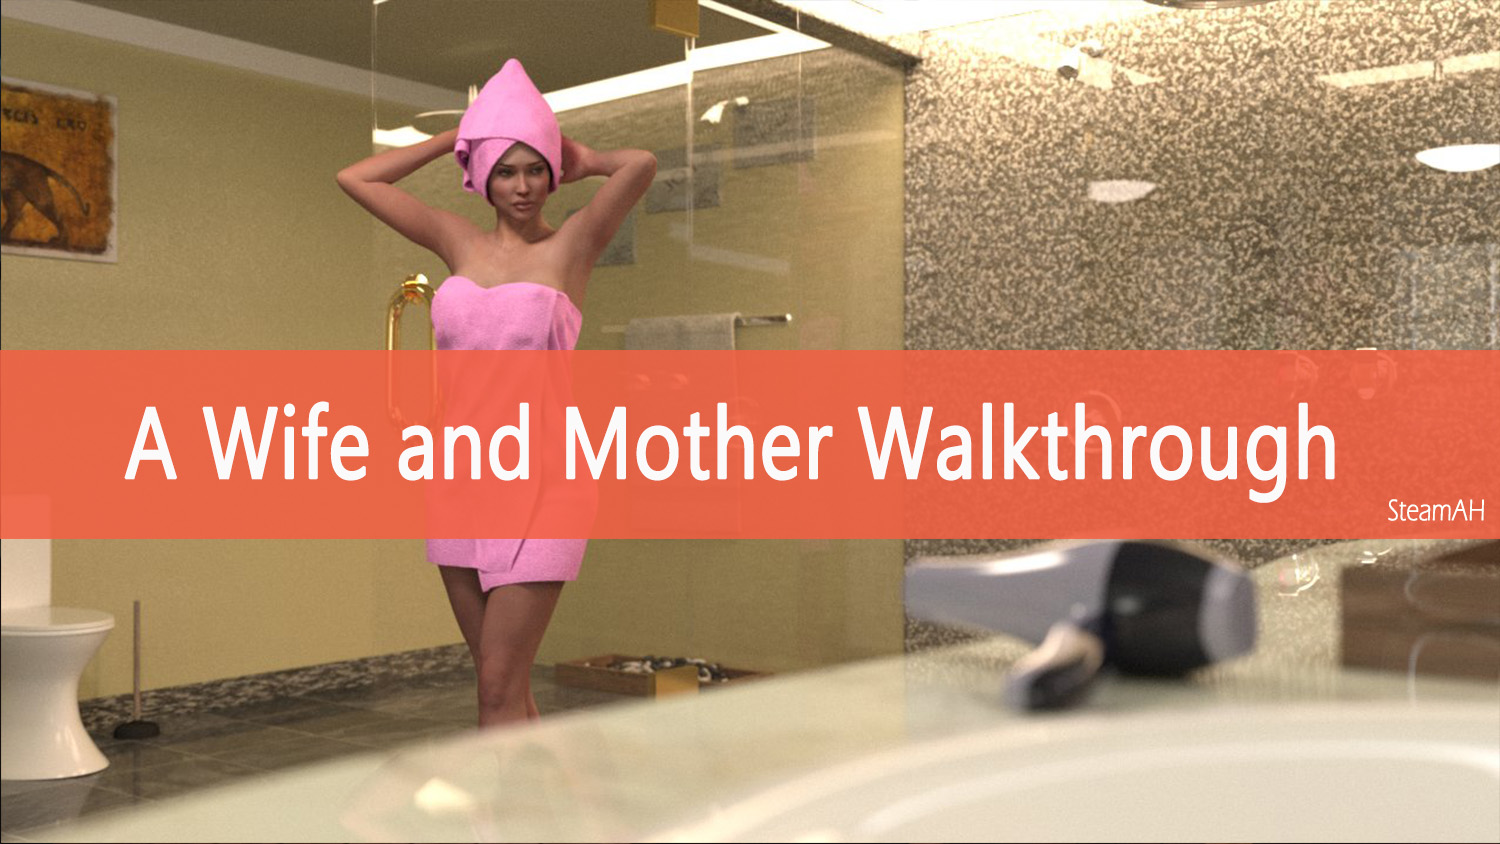 A wife and mother walkthrough